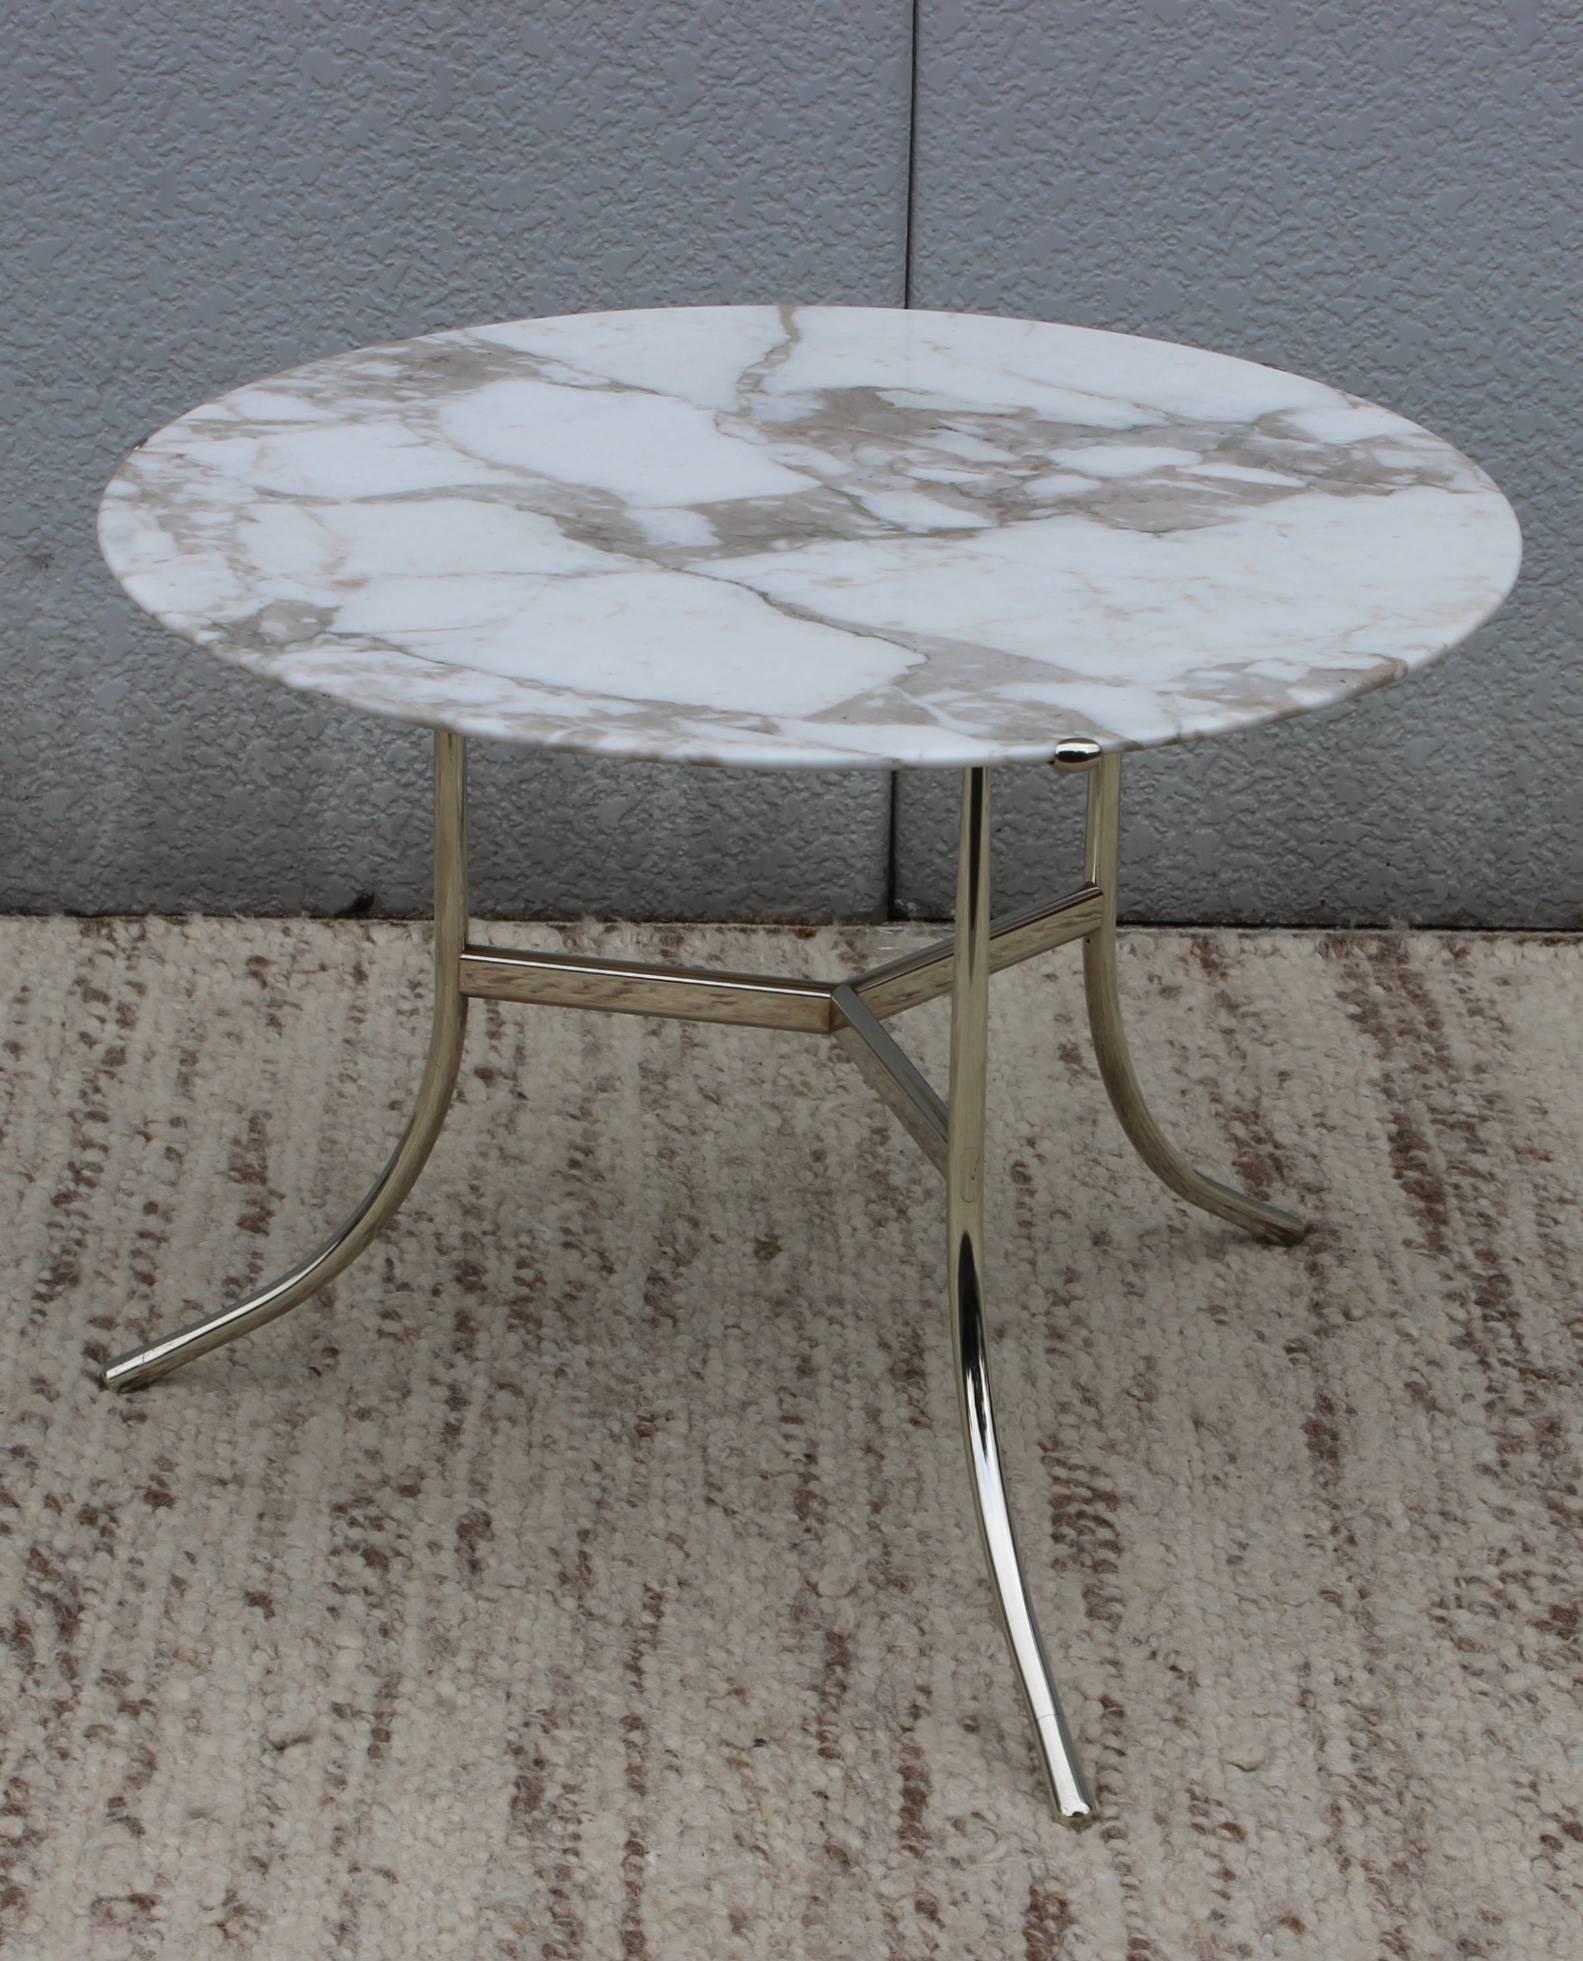 Very rare Cedric Hartman coffee table with Carrara marble top , there were only 3 of them made, signed and numbered ''4349'' the base is made of nickel silver alloy.